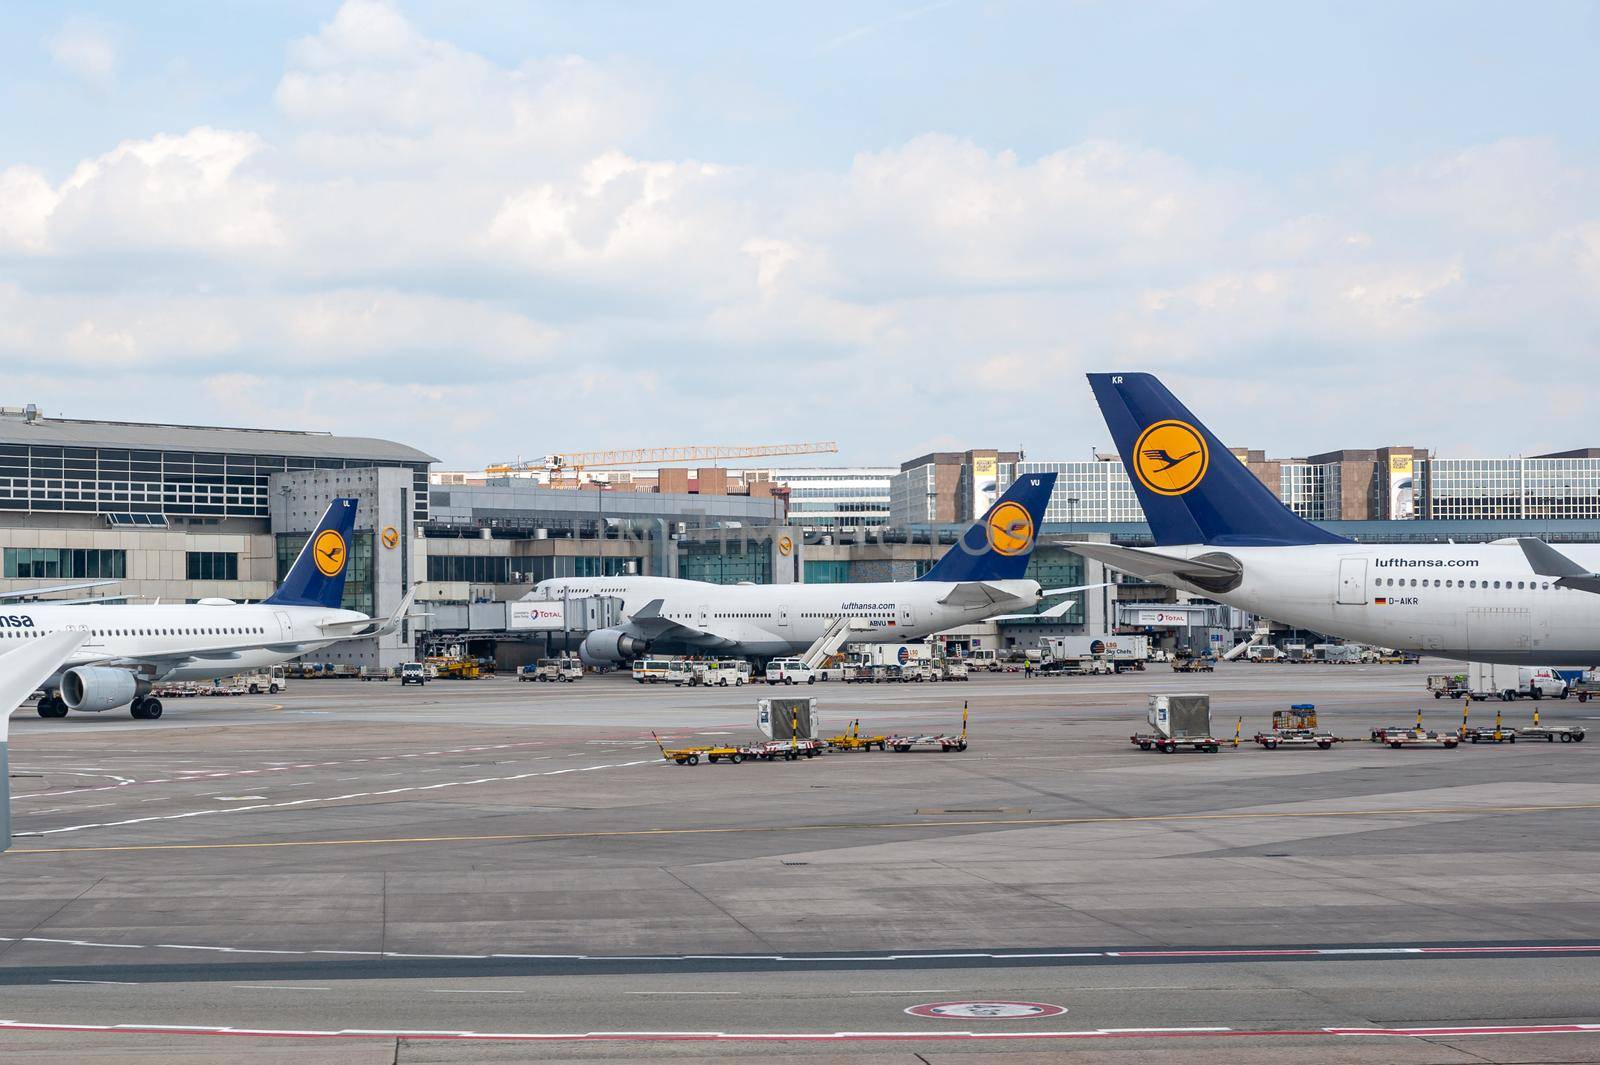 05/26/2019. Frankfurt Airport, Germany. Fleet of lufthansa airplanes. Airport operated by Fraport and serves as the main hub for Lufthansa.